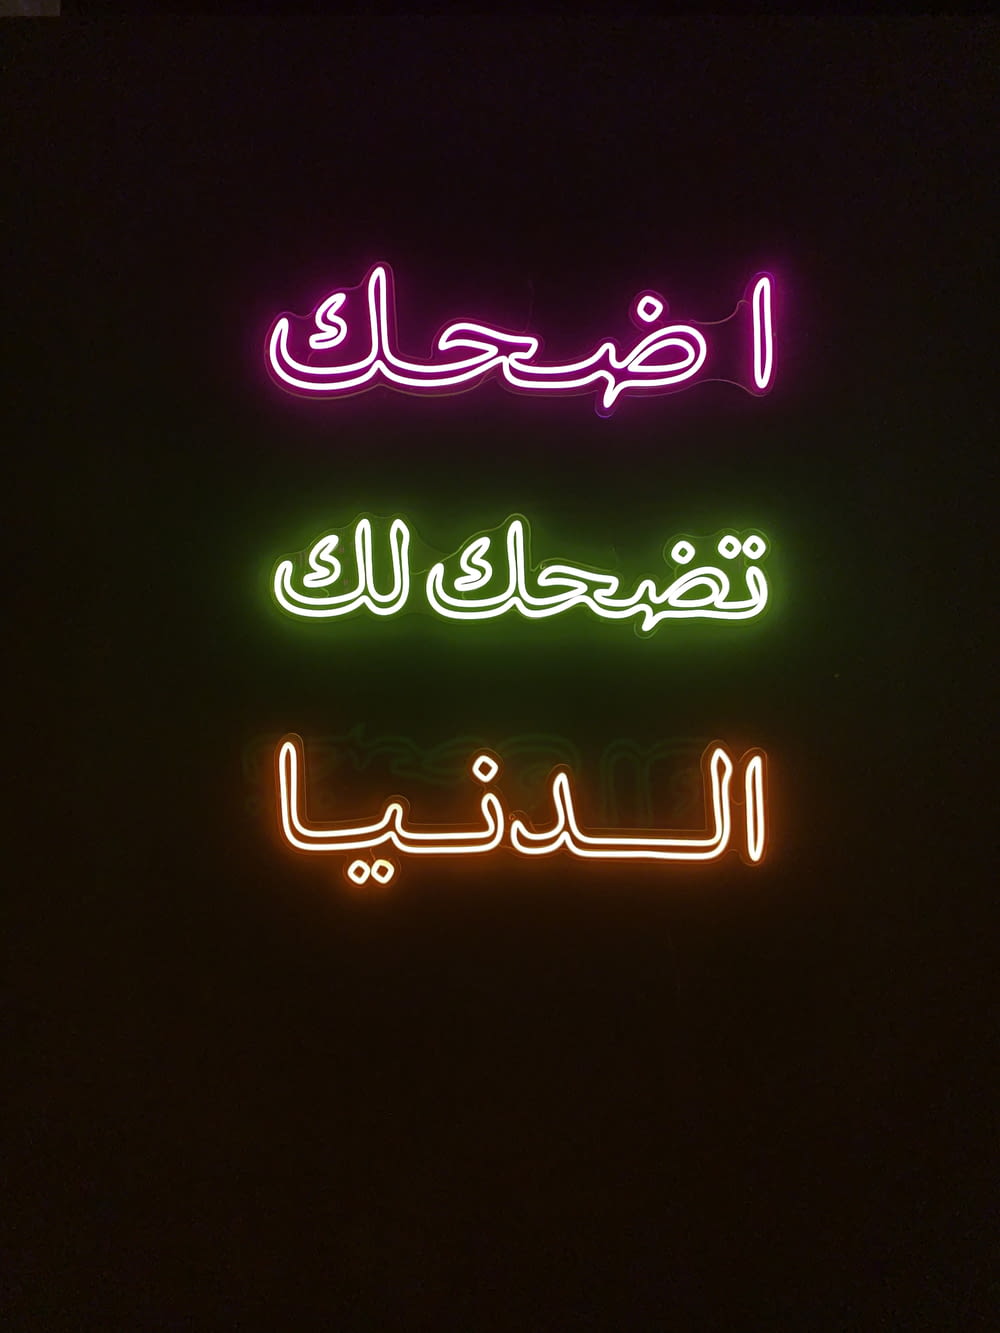 a neon sign that reads in two languages